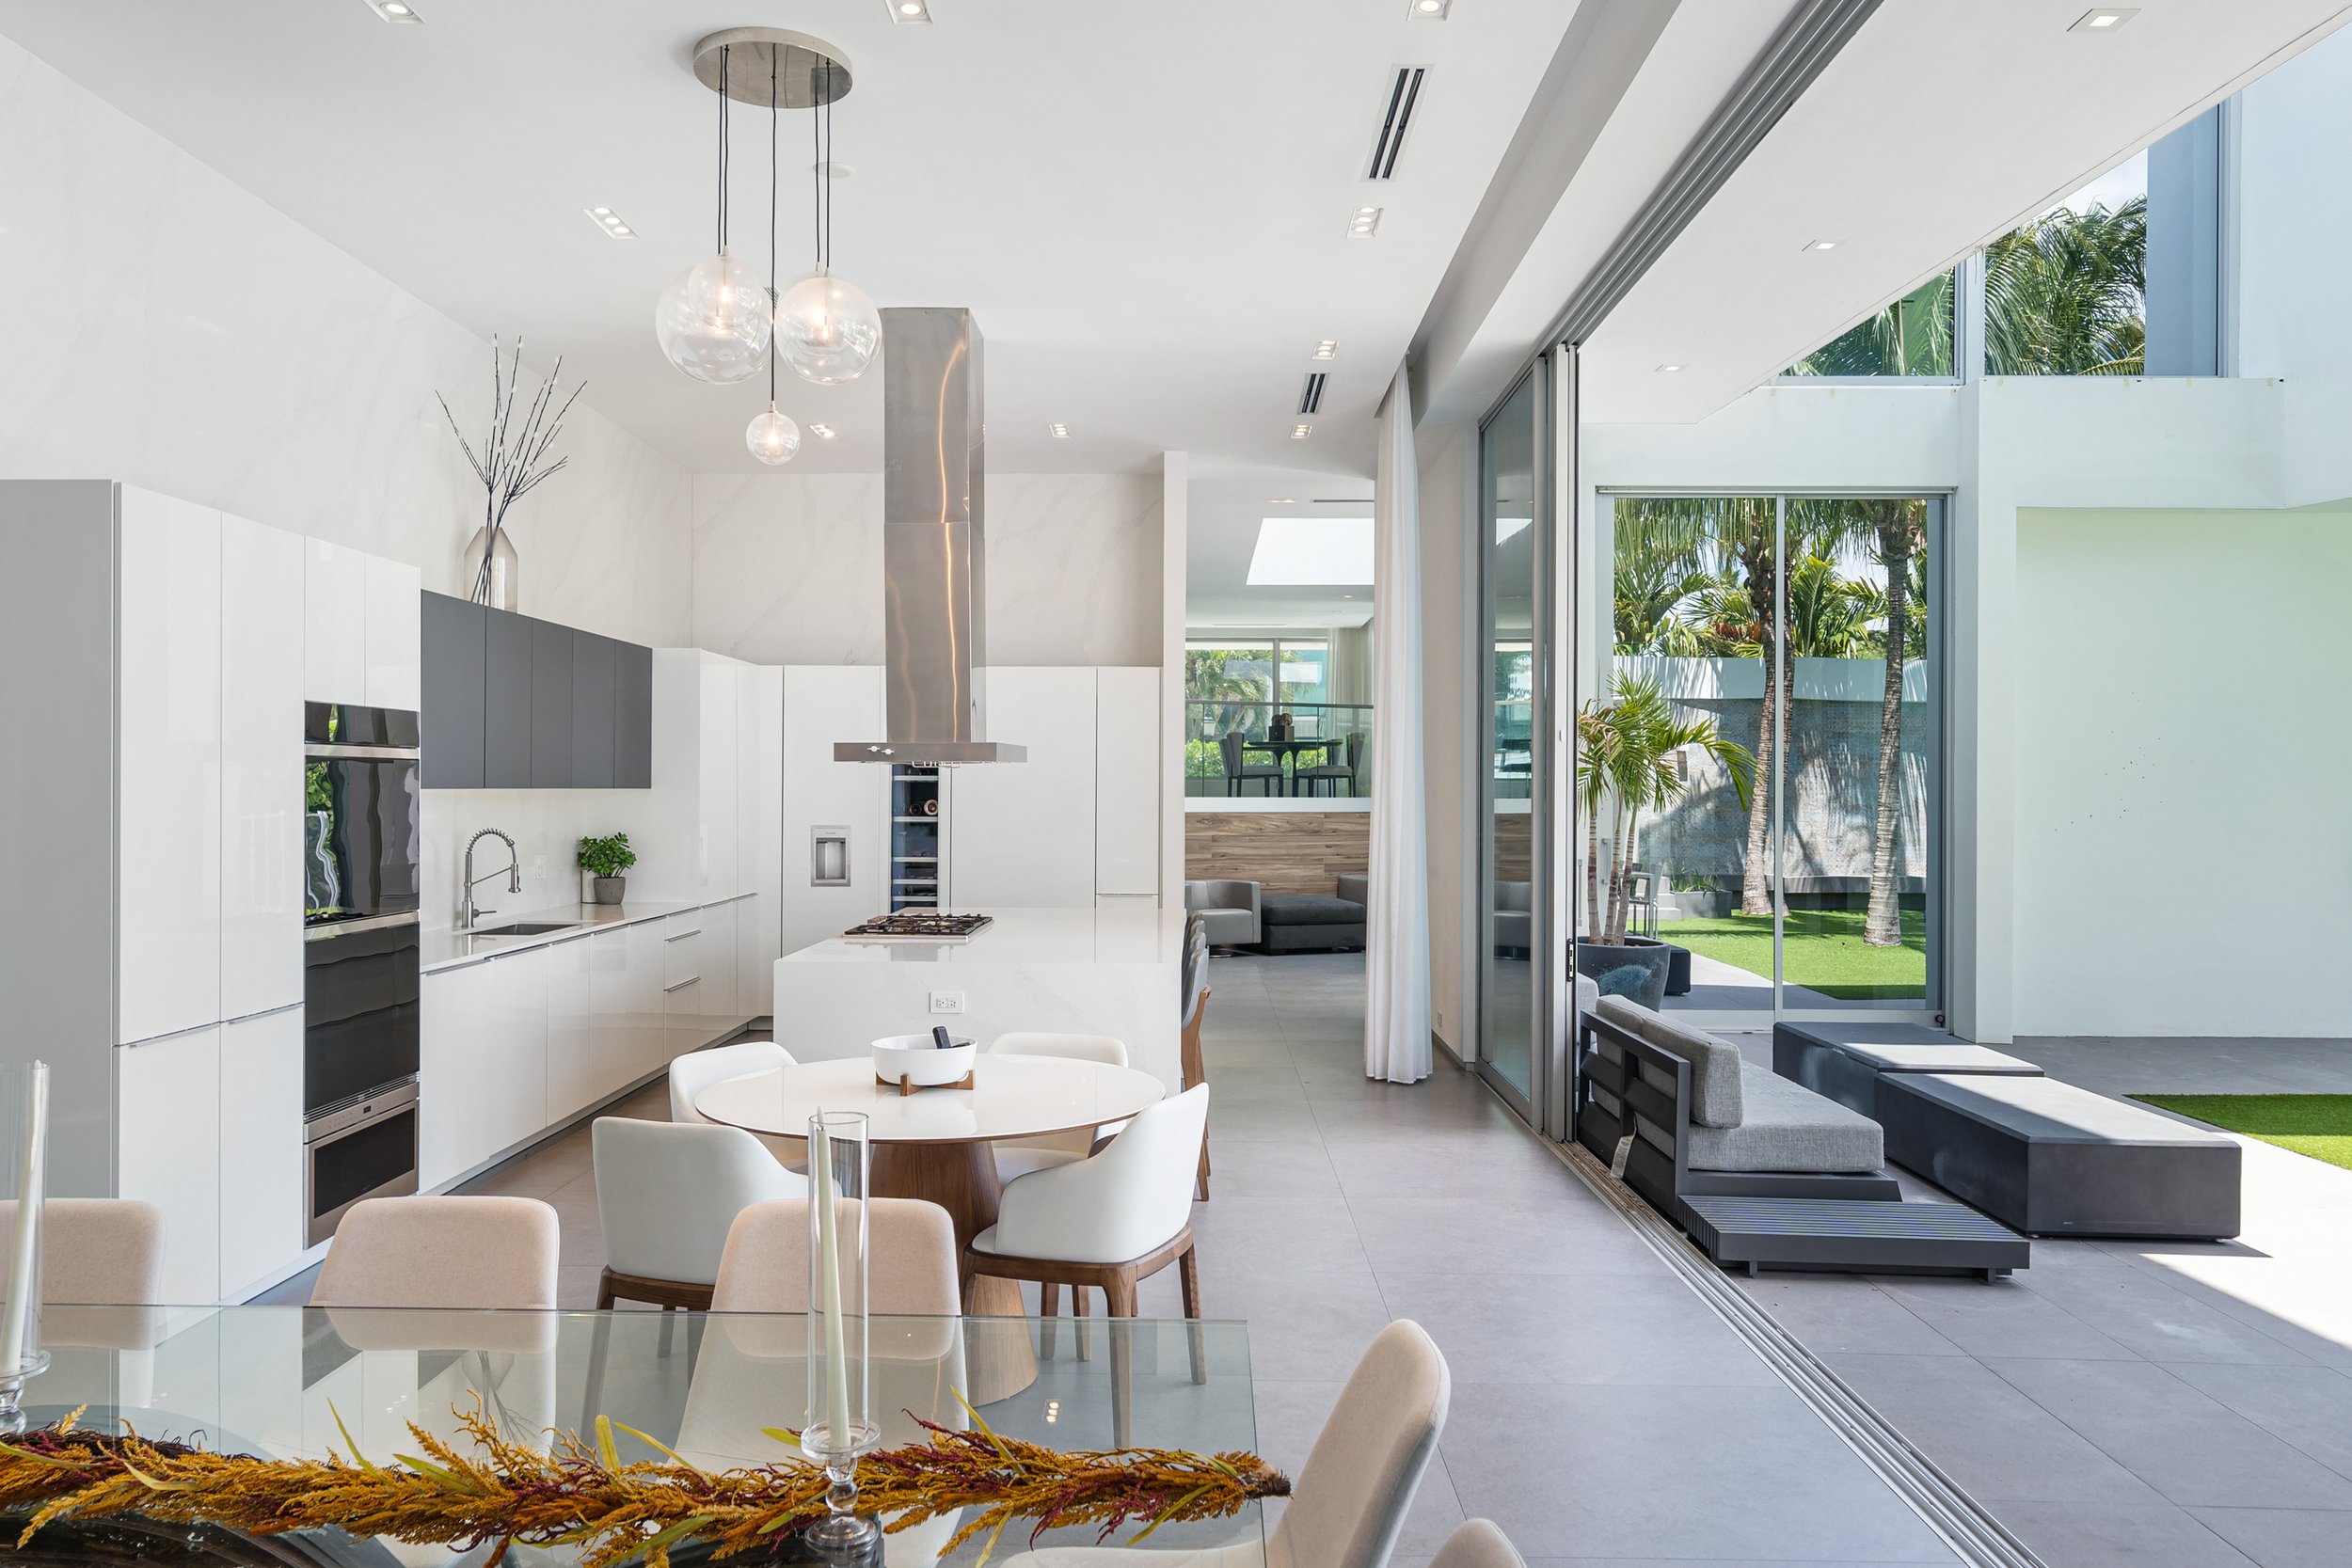 Miami Heat Star Victor Oladipo Lists Hibiscus Island Contemporary For $10 Million Amidst NBA Finals 10.jpg